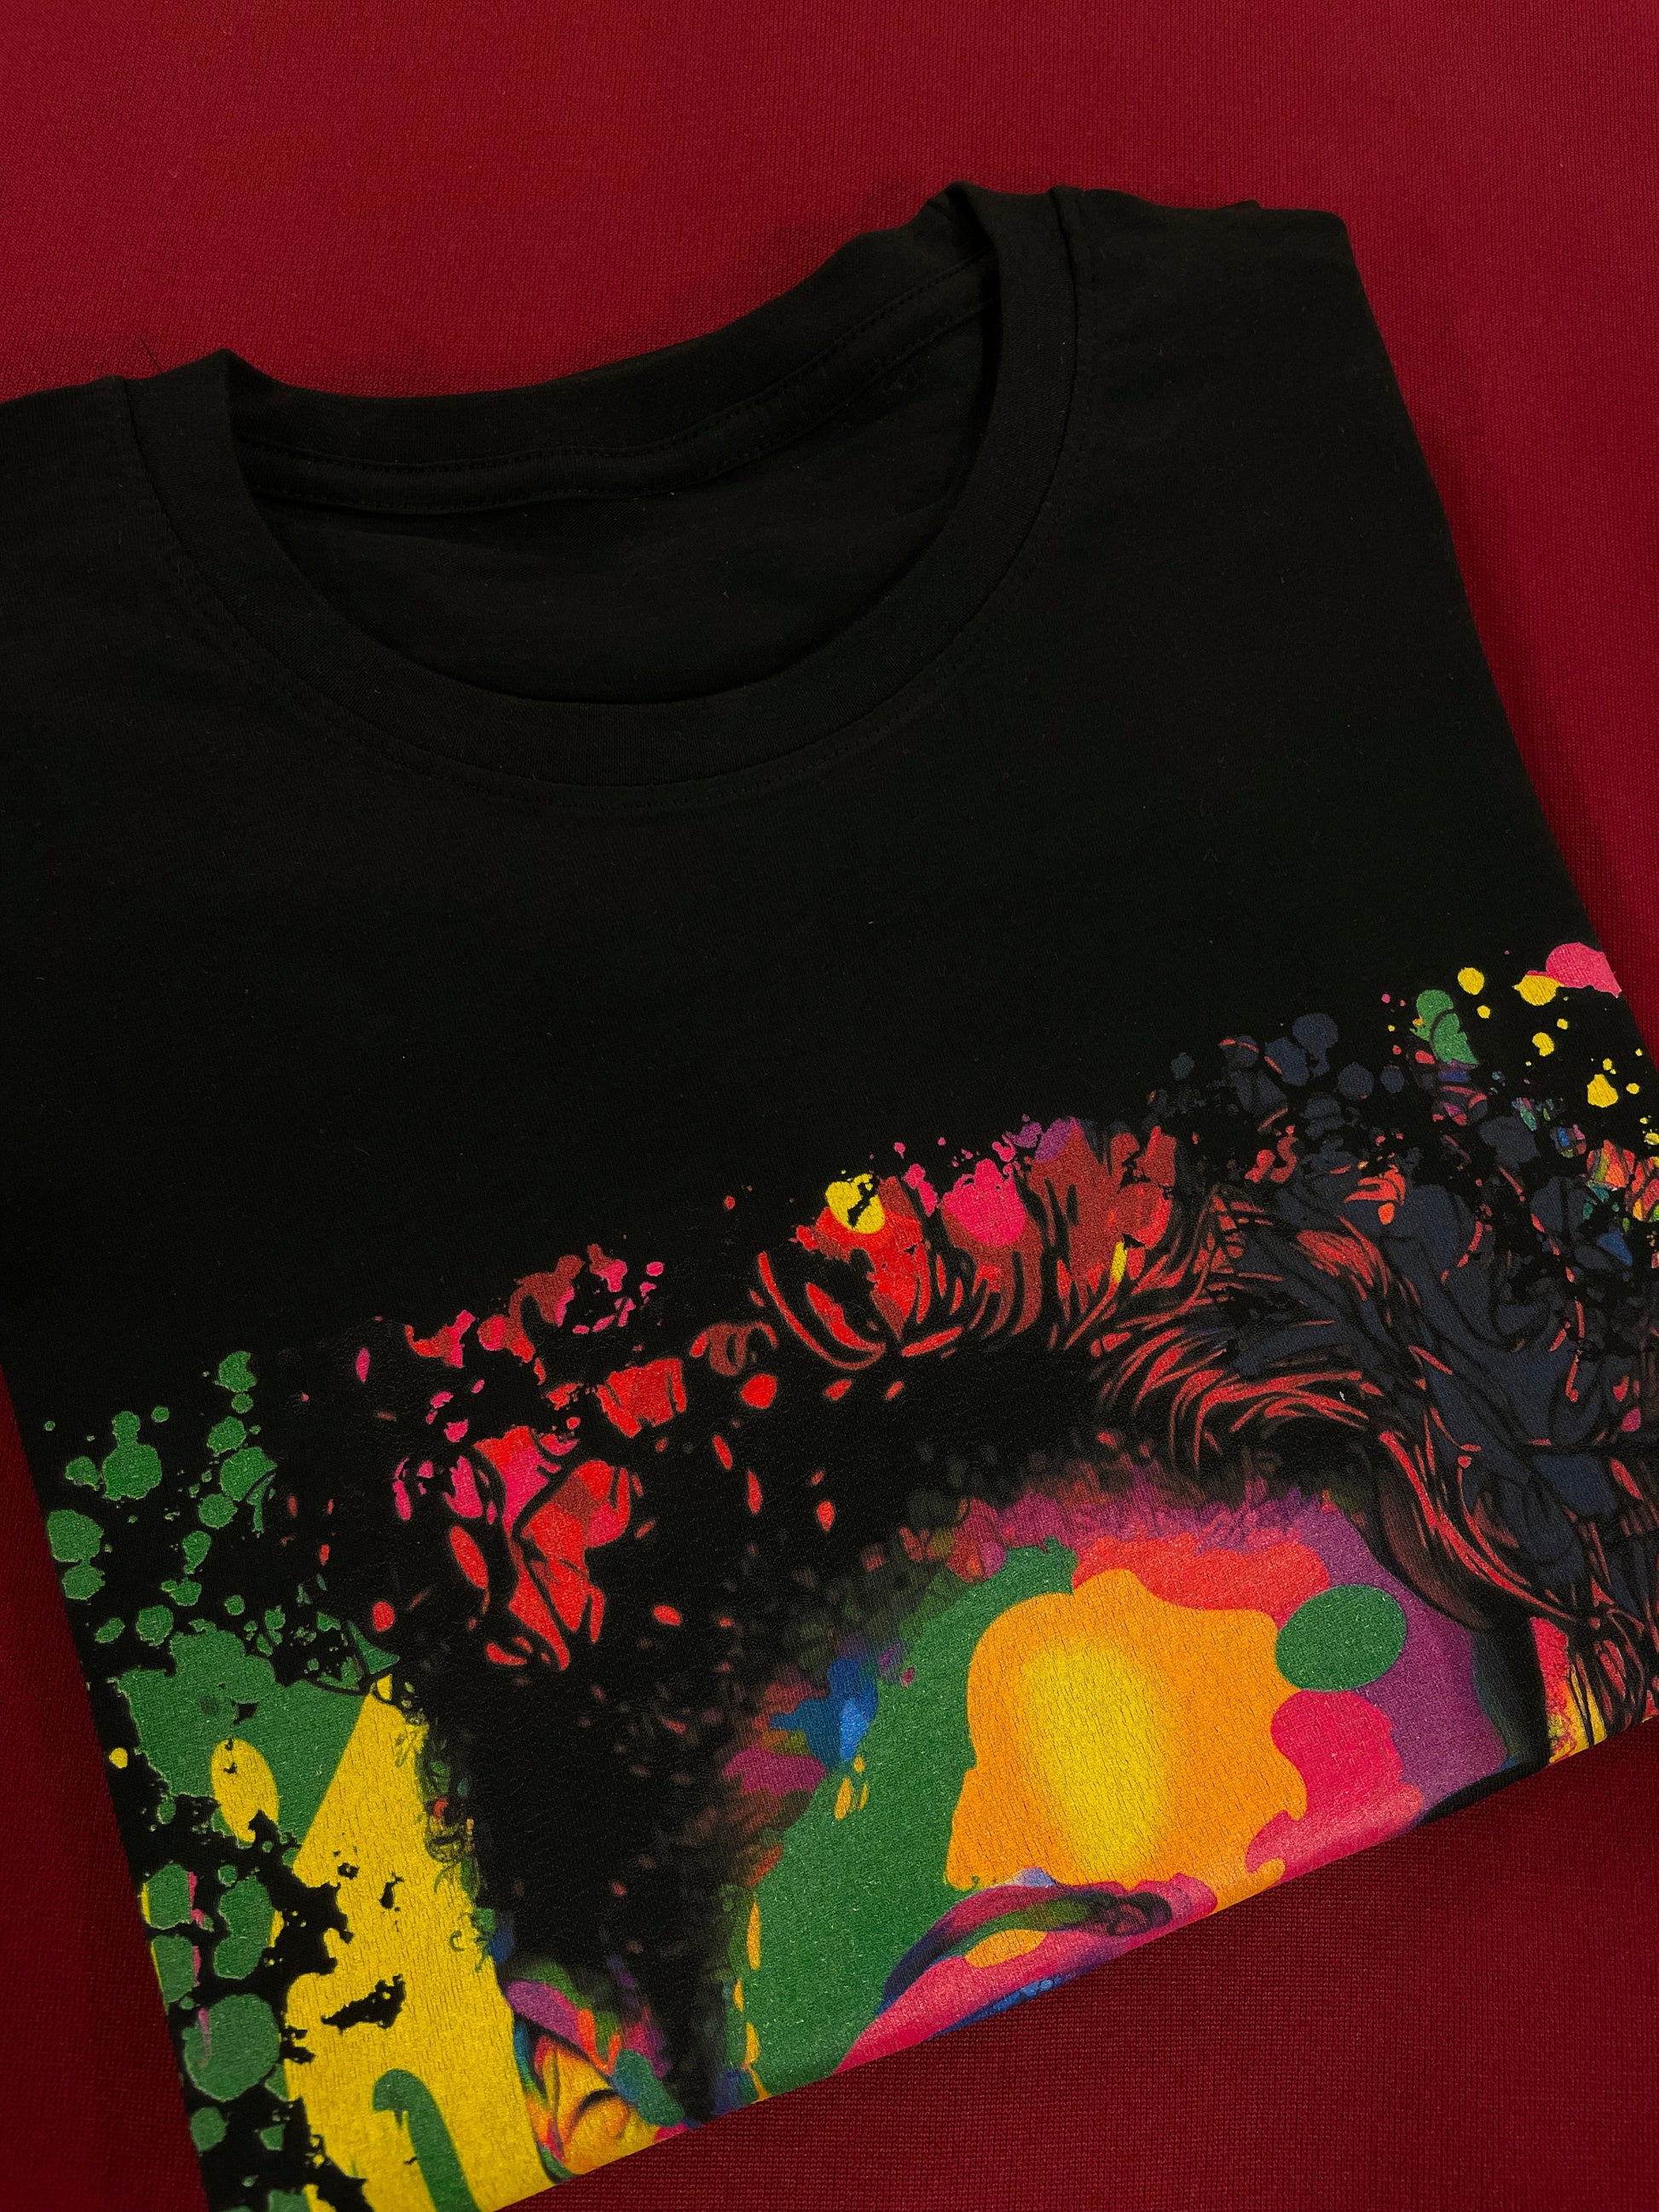 A folded unisex cotton t-shirt with a vibrant 90s pop art print, featuring bold colors and graphic shapes arranged in a playful pattern. The folded tee is shown from a top-down view, creating a neat and organized appearance.